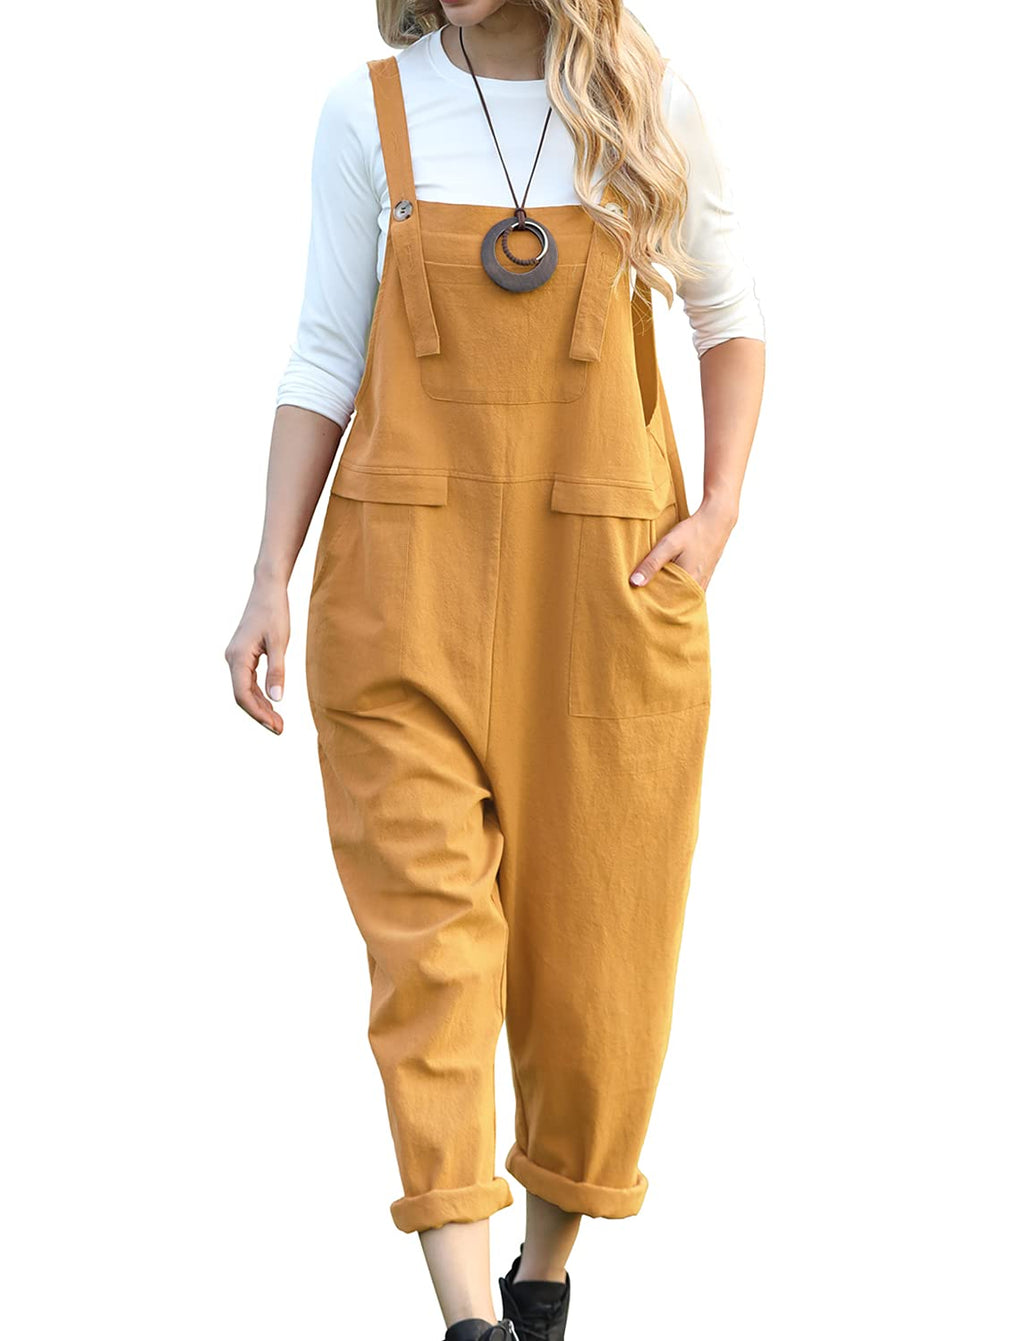 [Australia] - YESNO Women's Dungarees Loose Casual Sleeveless Overall Long Jumpsuit Playsuit Dungarees PV9UK S Pv9 Ginger-UK 